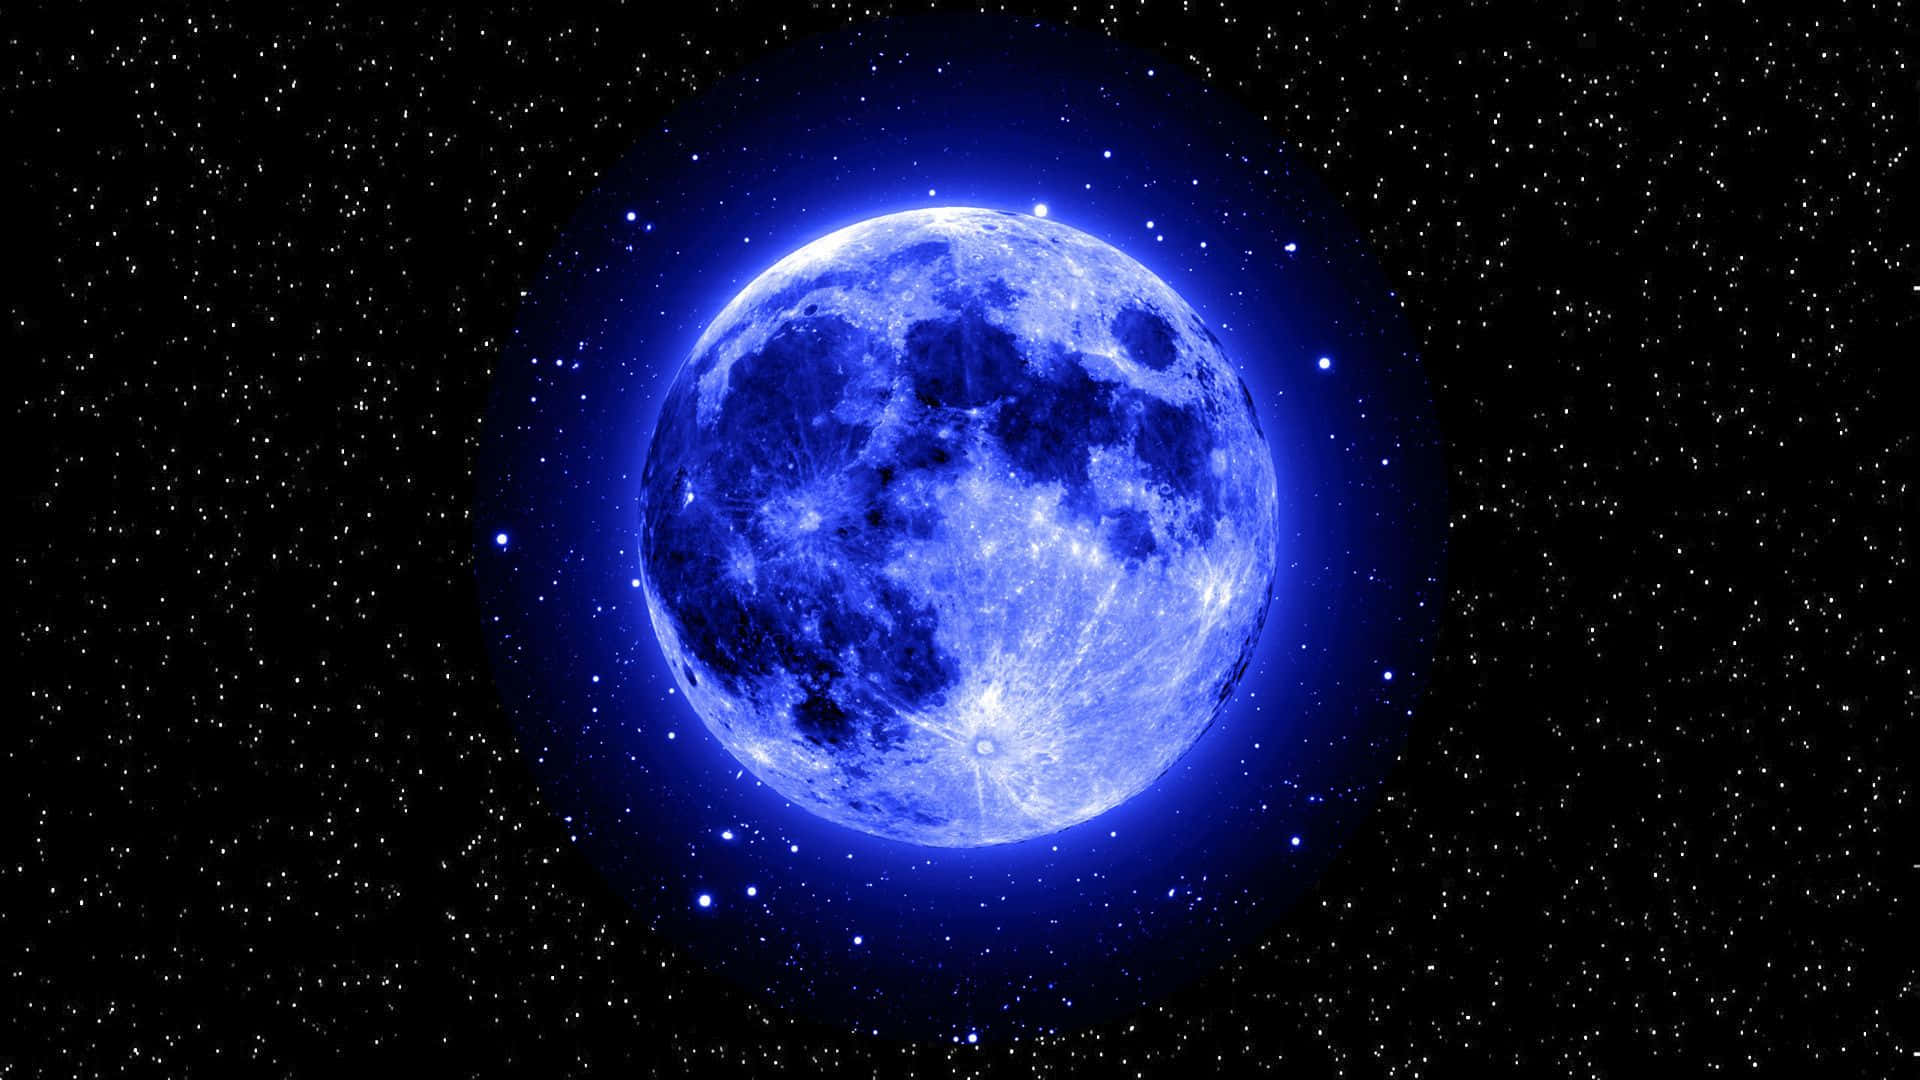 A beautiful view of the night sky with a full moon